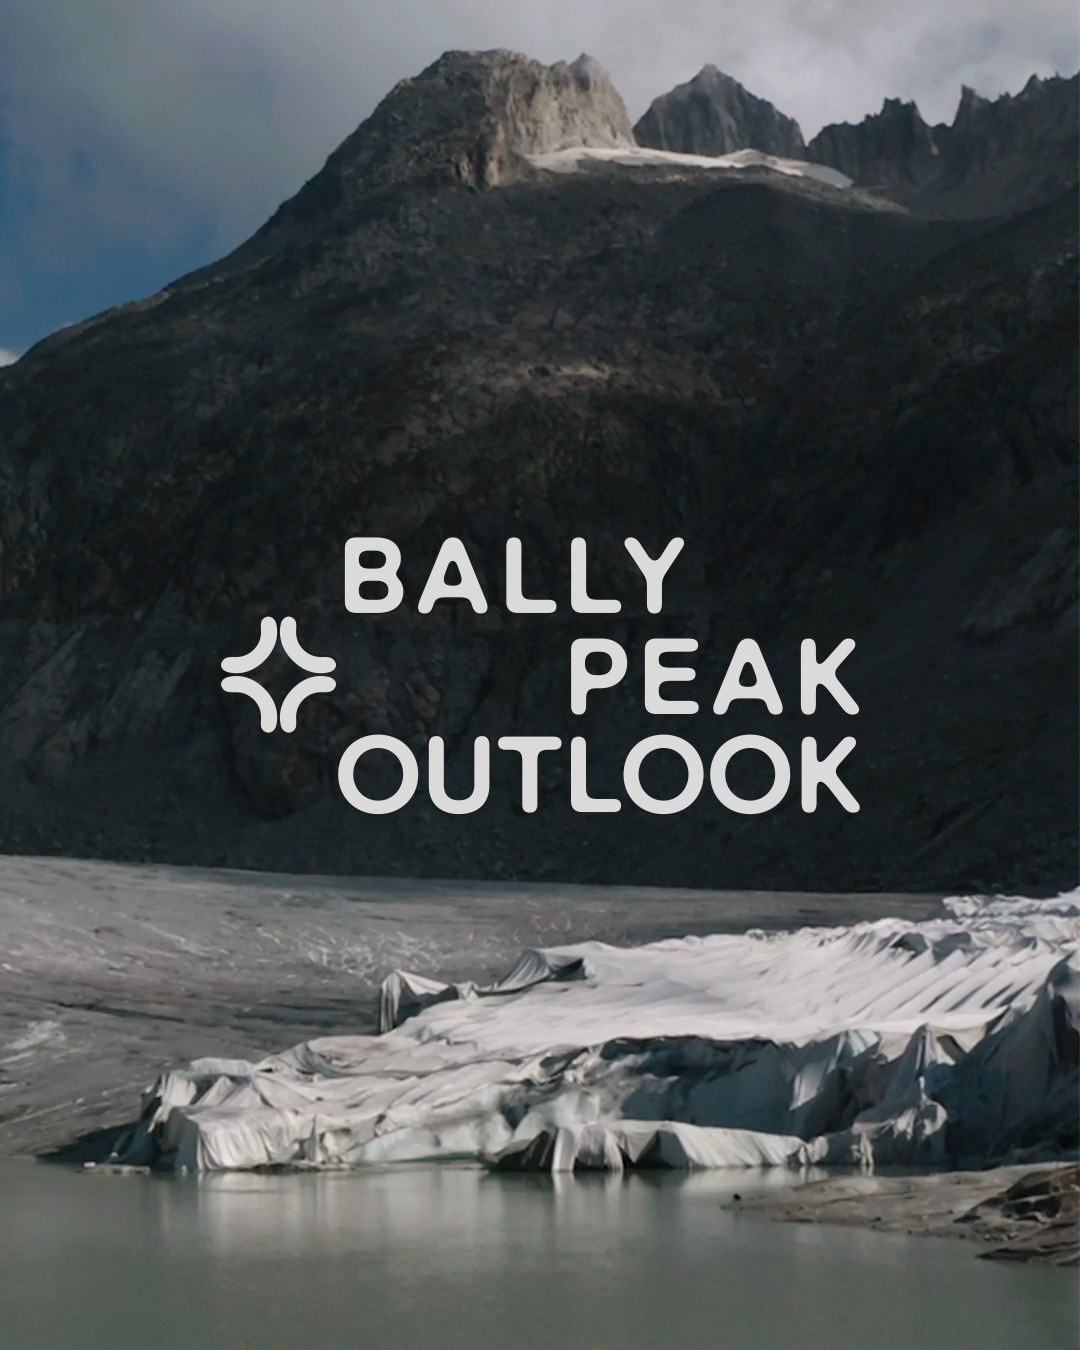 Introducing the new Bally Peak Outlook capsule, an eco-friendly collection of outdoors-inspired products where 100% of net proceeds will benefit mountain preservation through the Bally Peak Outlook Foundation